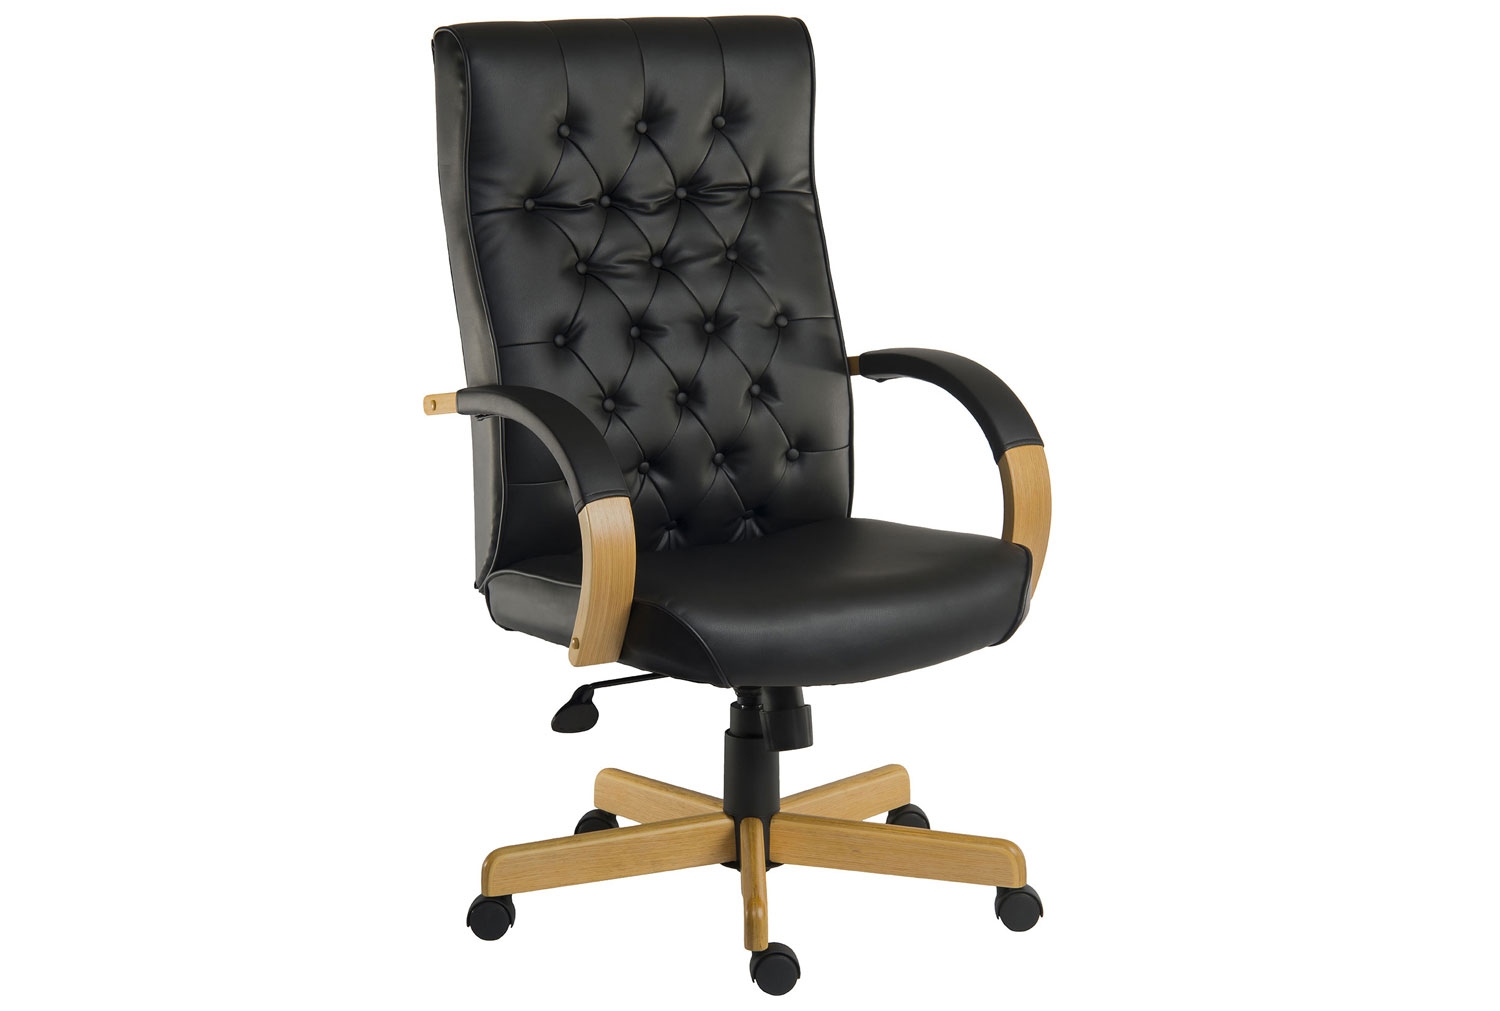 Warwick Leather Faced Executive Office Chair (Black), Fully Installed